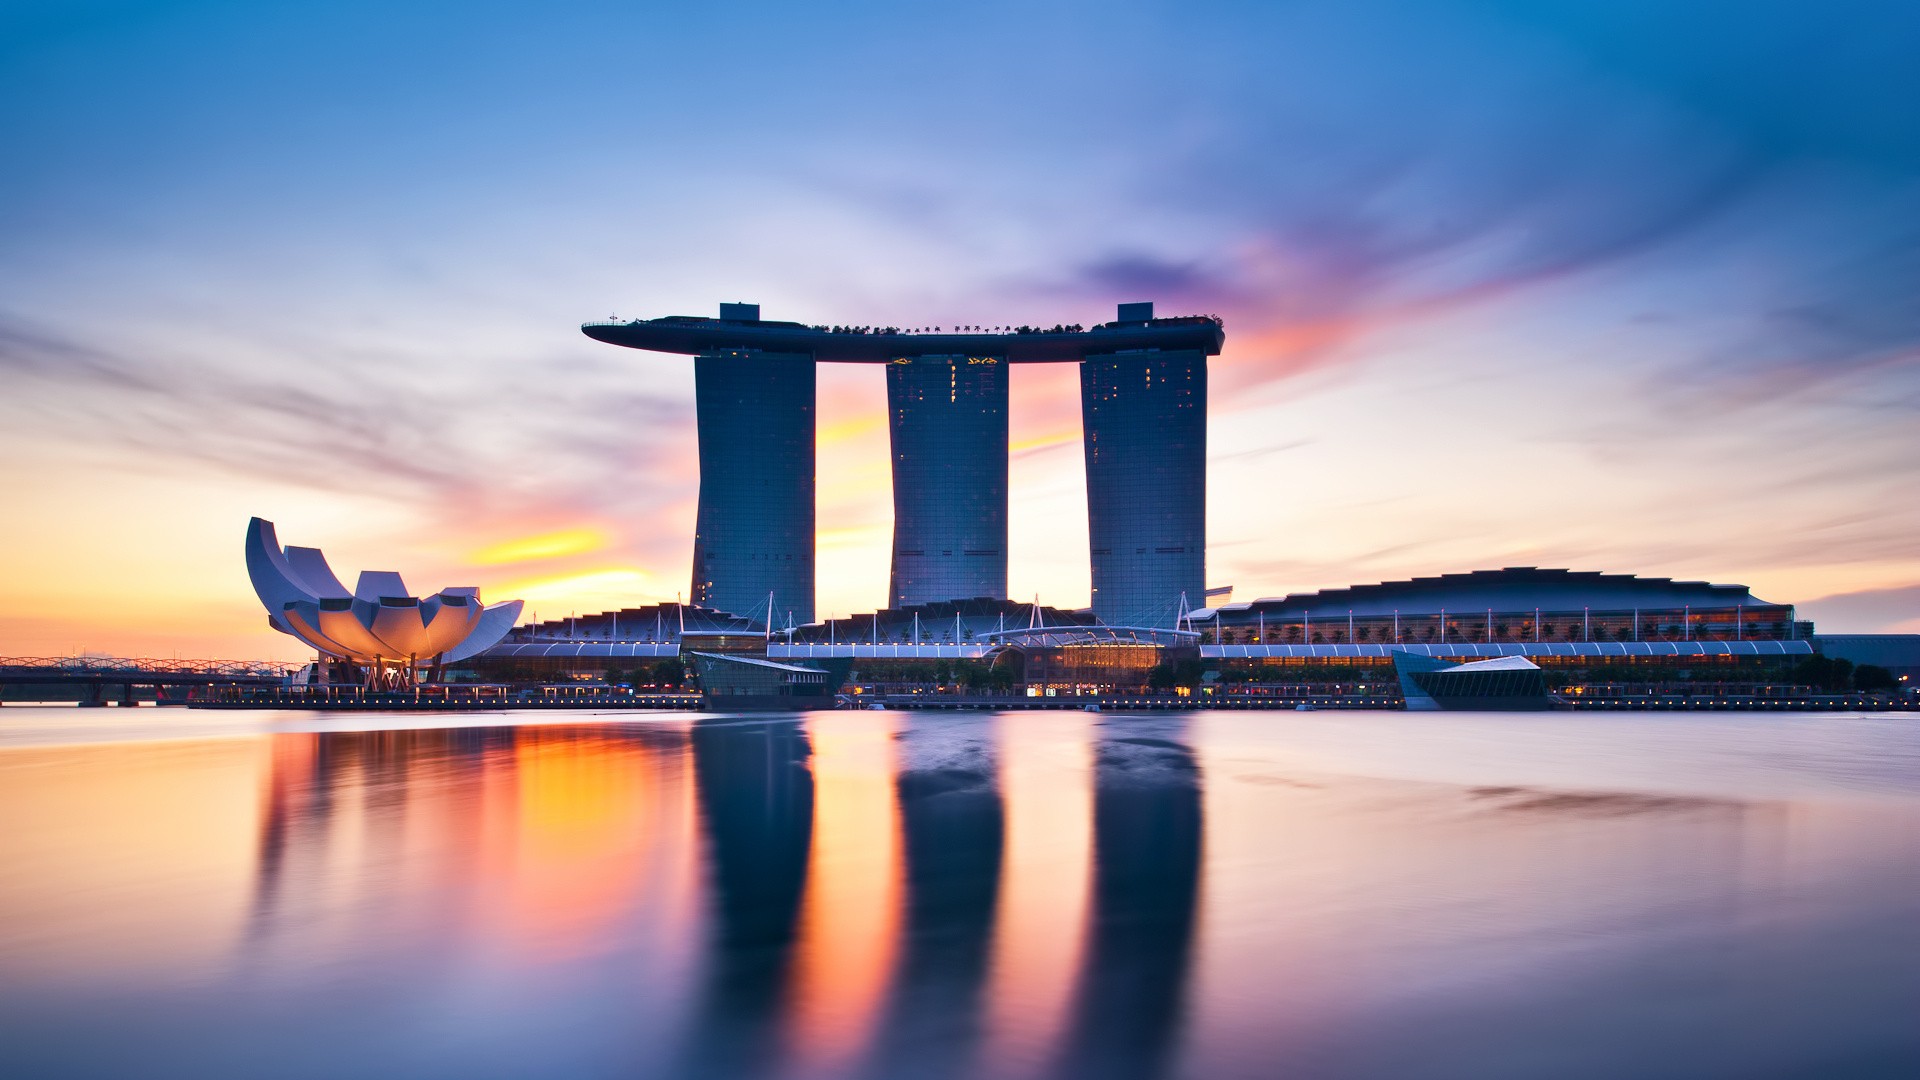 cityscapes, Architecture, Singapore, Town, Skyscrapers, Marina, Bay, Sands, Cities Wallpaper